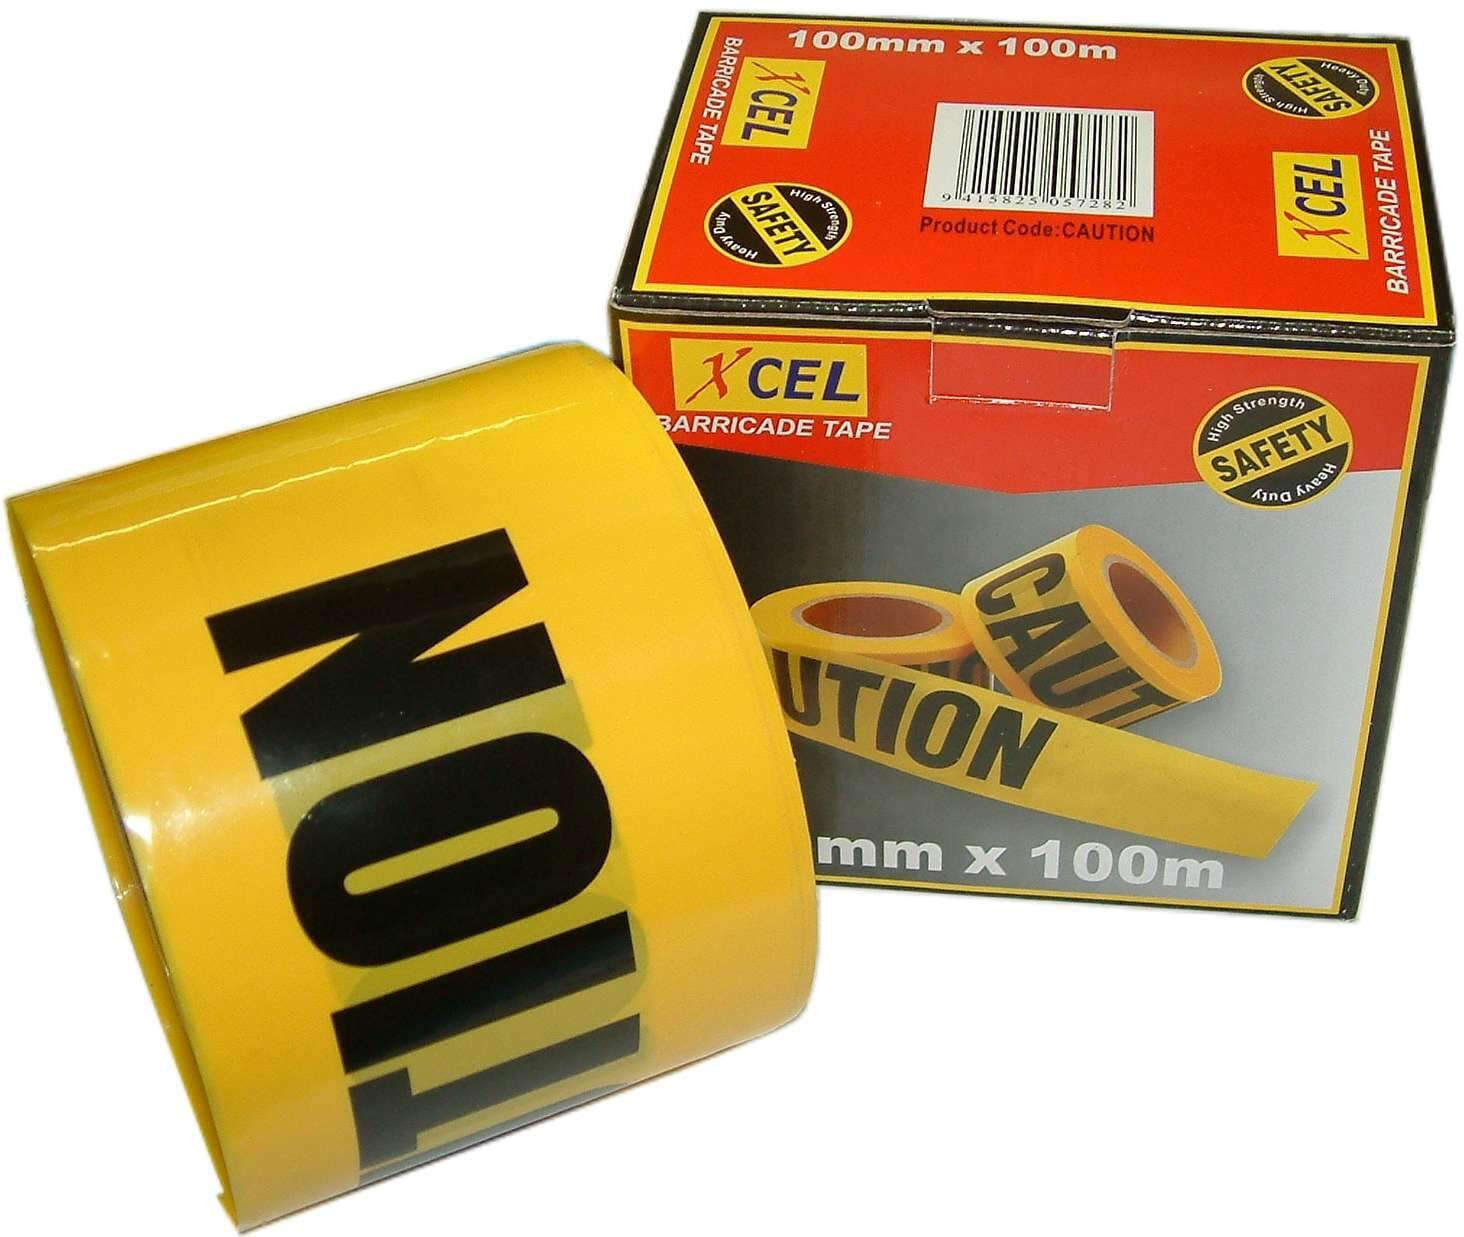 Xcel Barrier Tape - Caution - Yellow 100mm x 100m